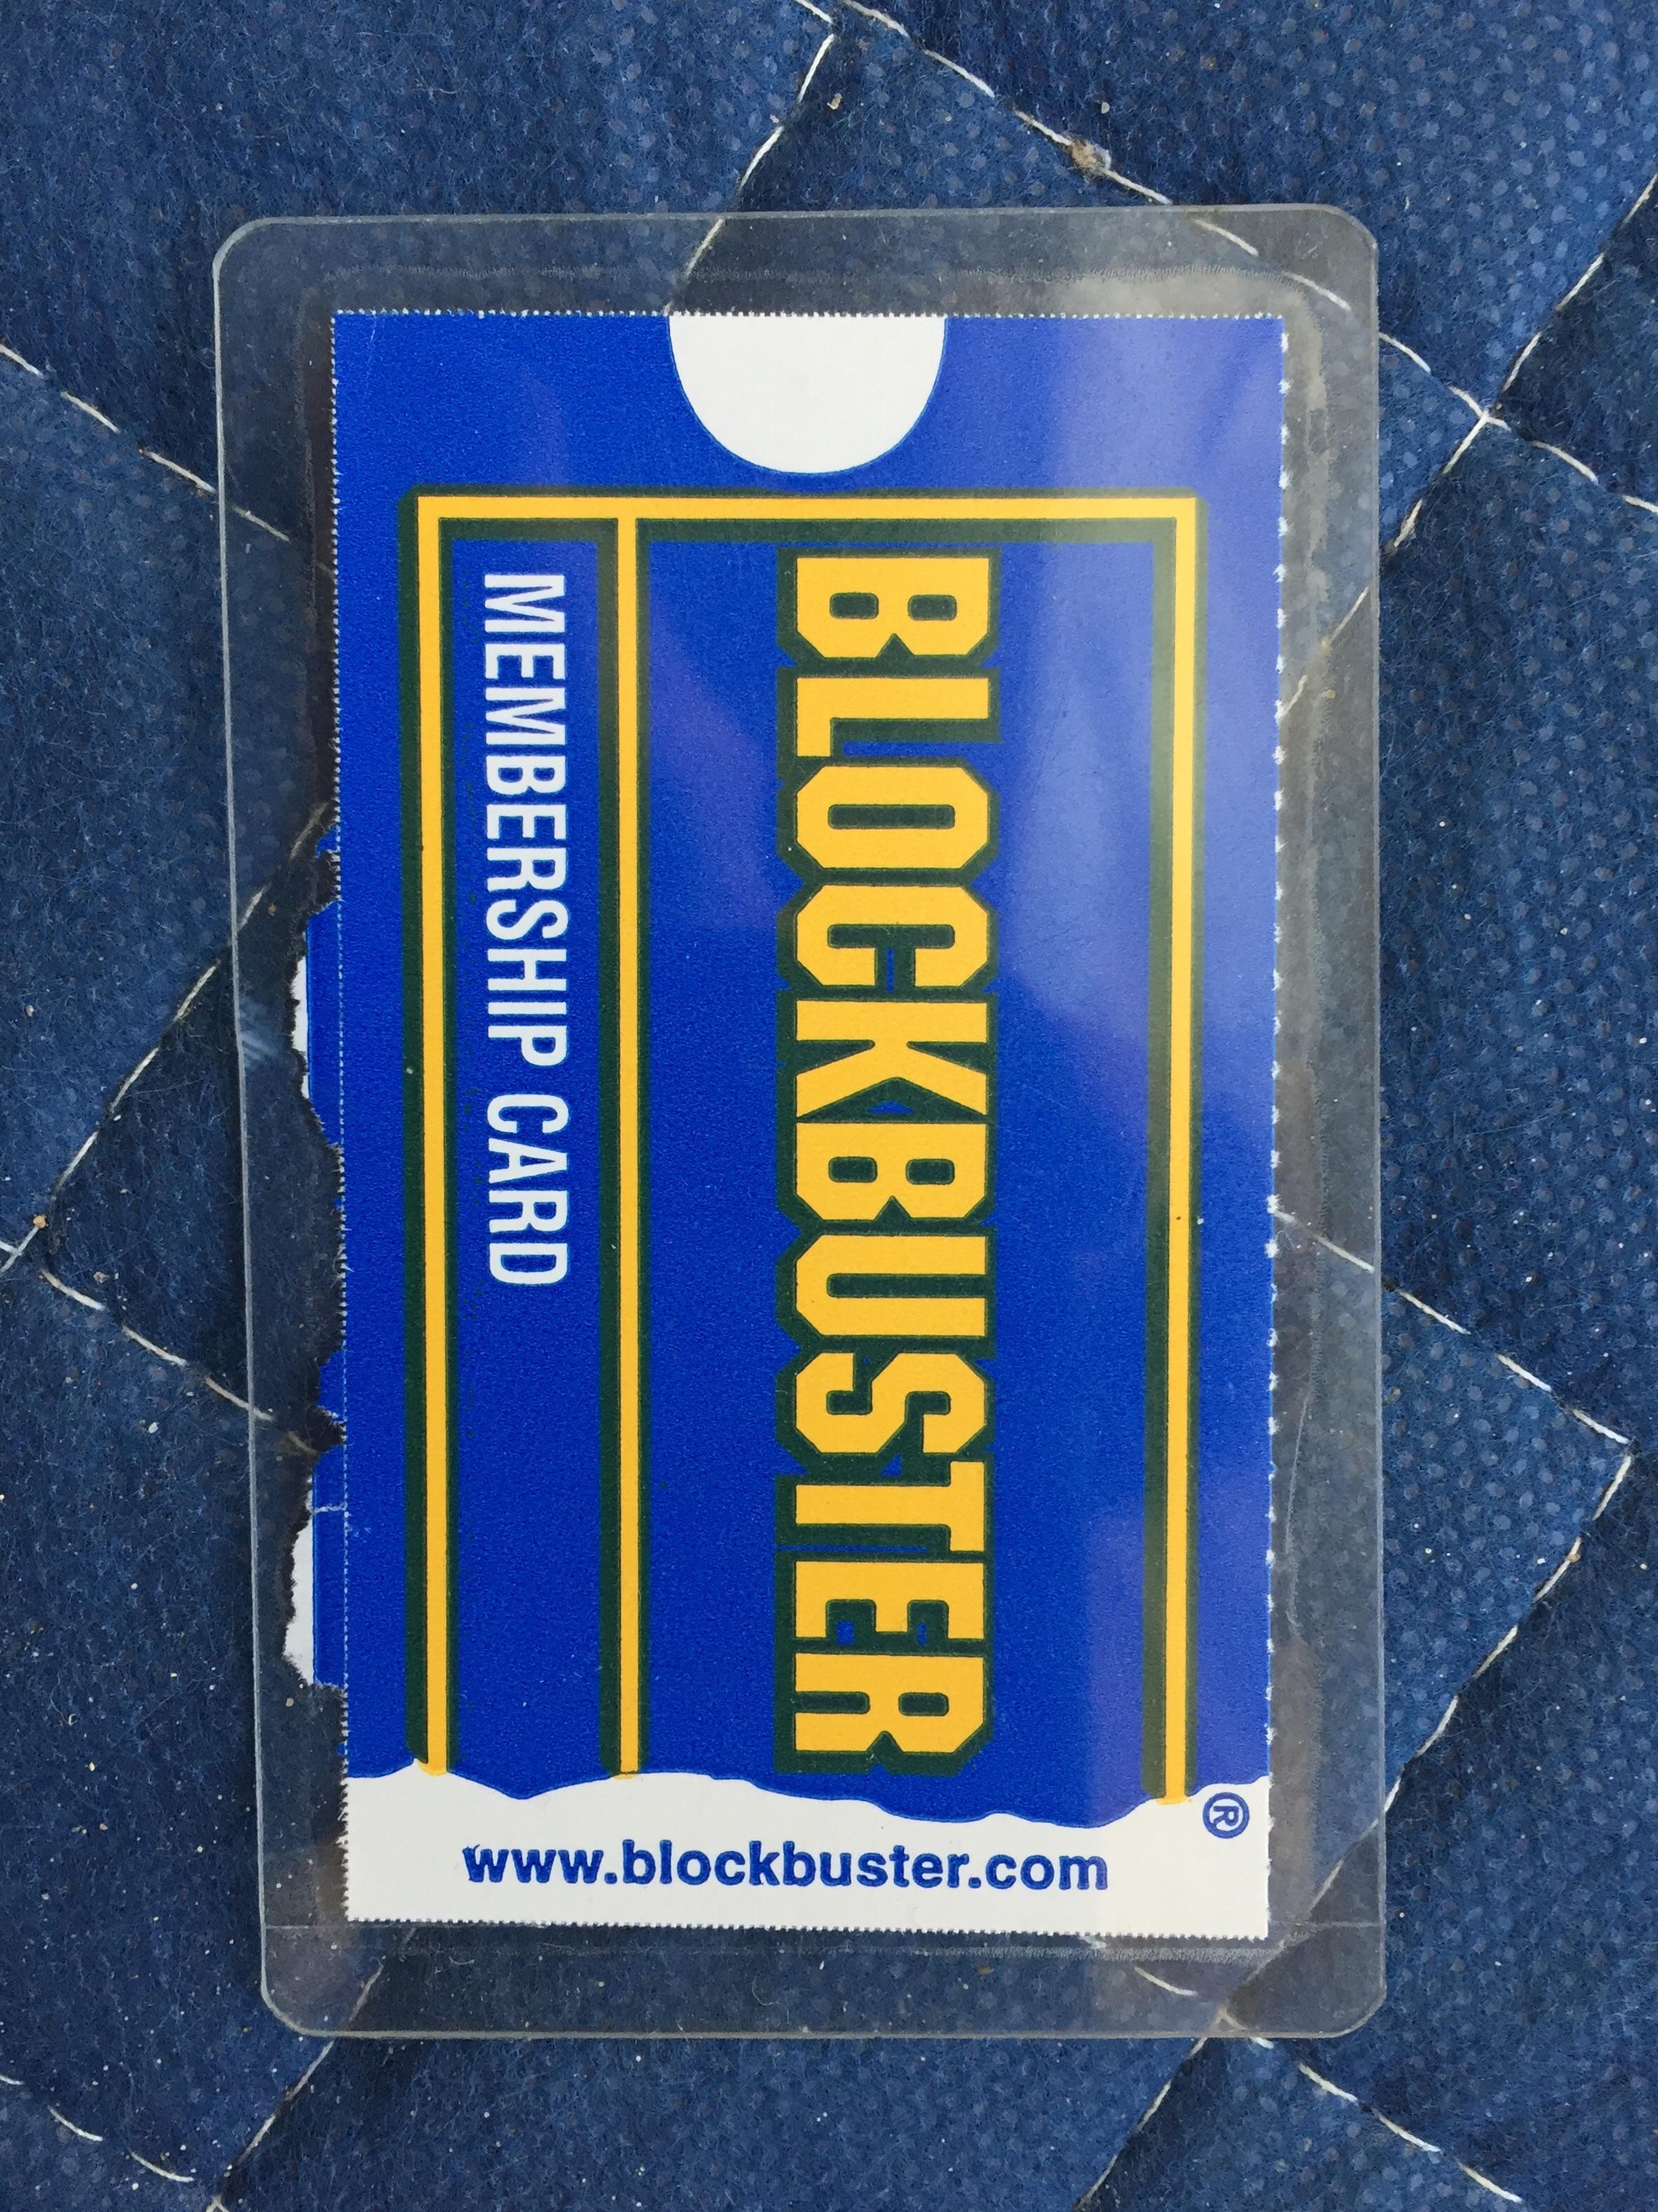 Old Blockbuster Logo - Saw this artifact while I was revisiting my old box of movies ...